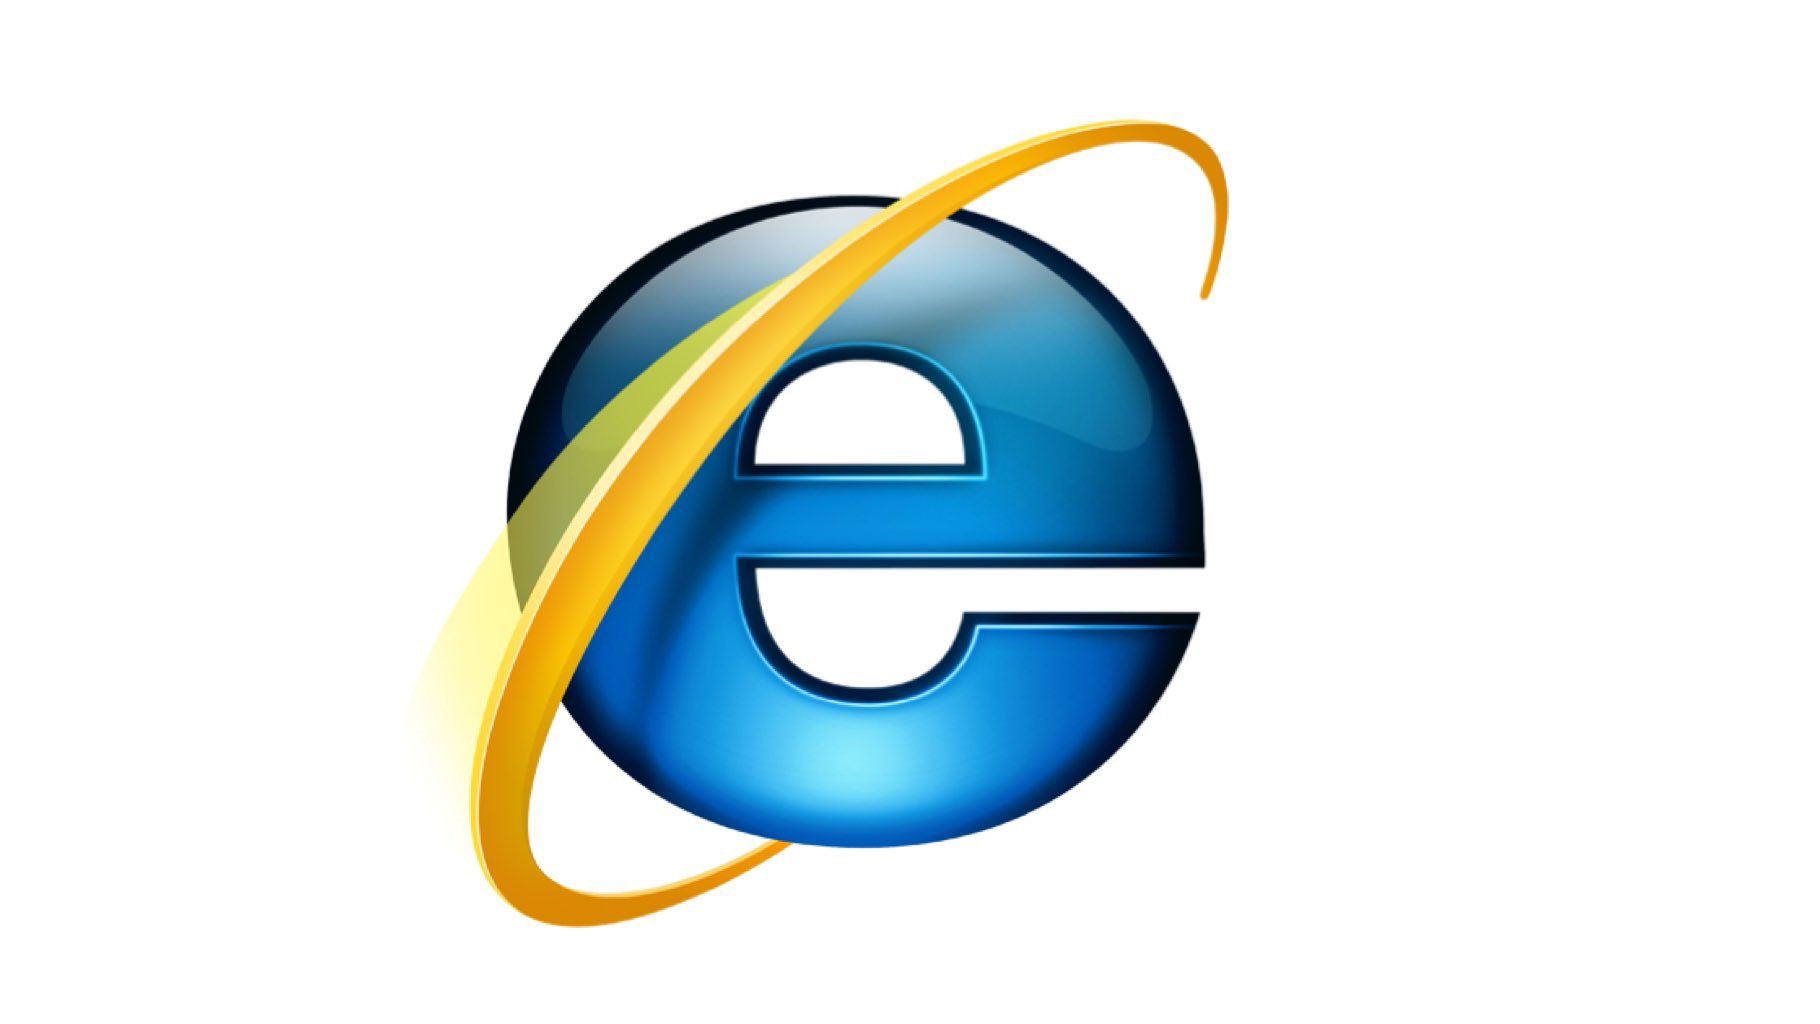 Microsoft retires Internet Explorer: How to continue using browser